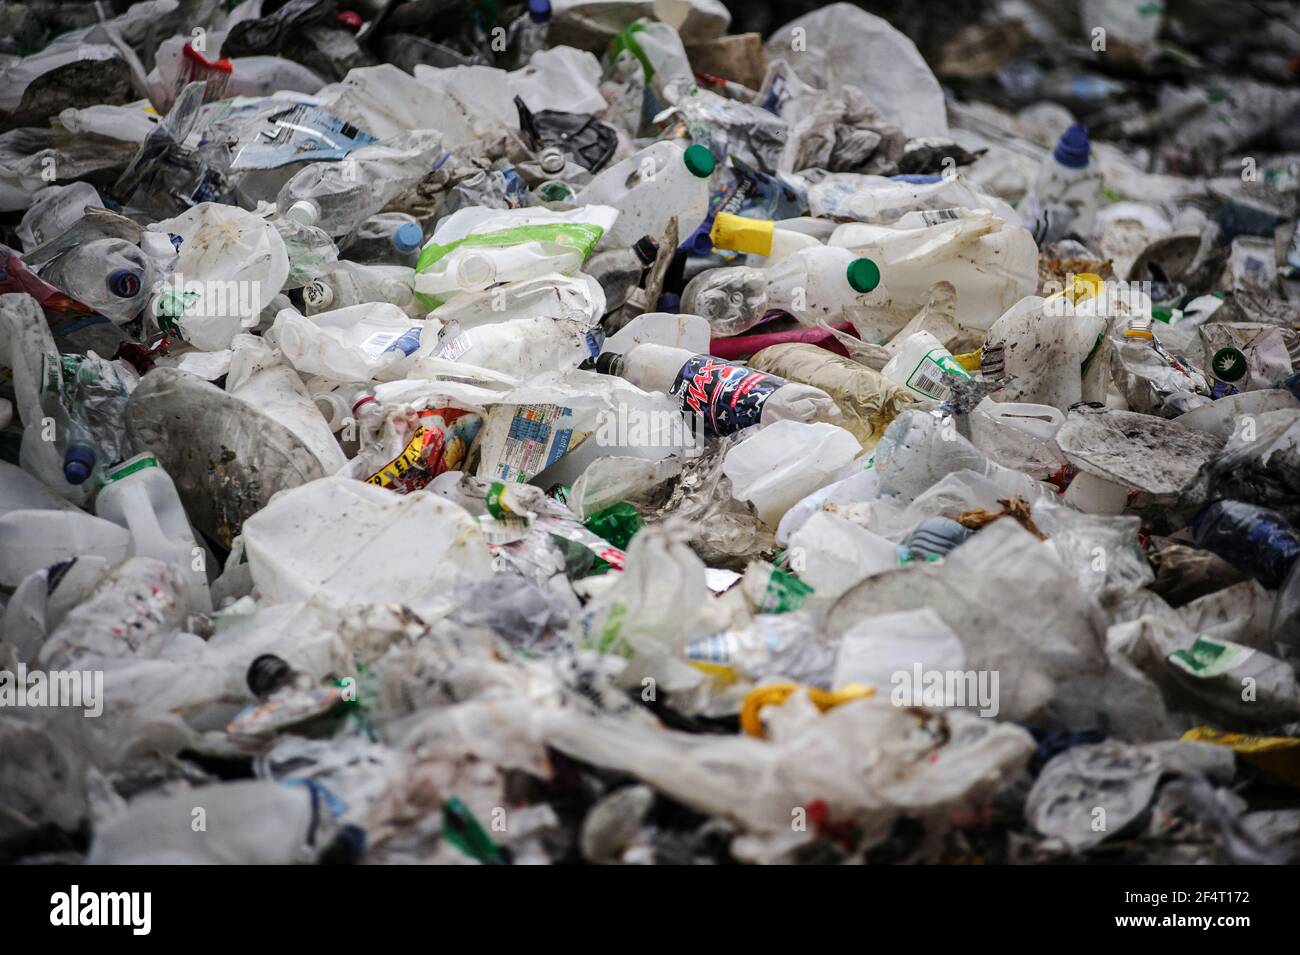 Plastic waste at a materials recycling facility in the UK. Stock Photo